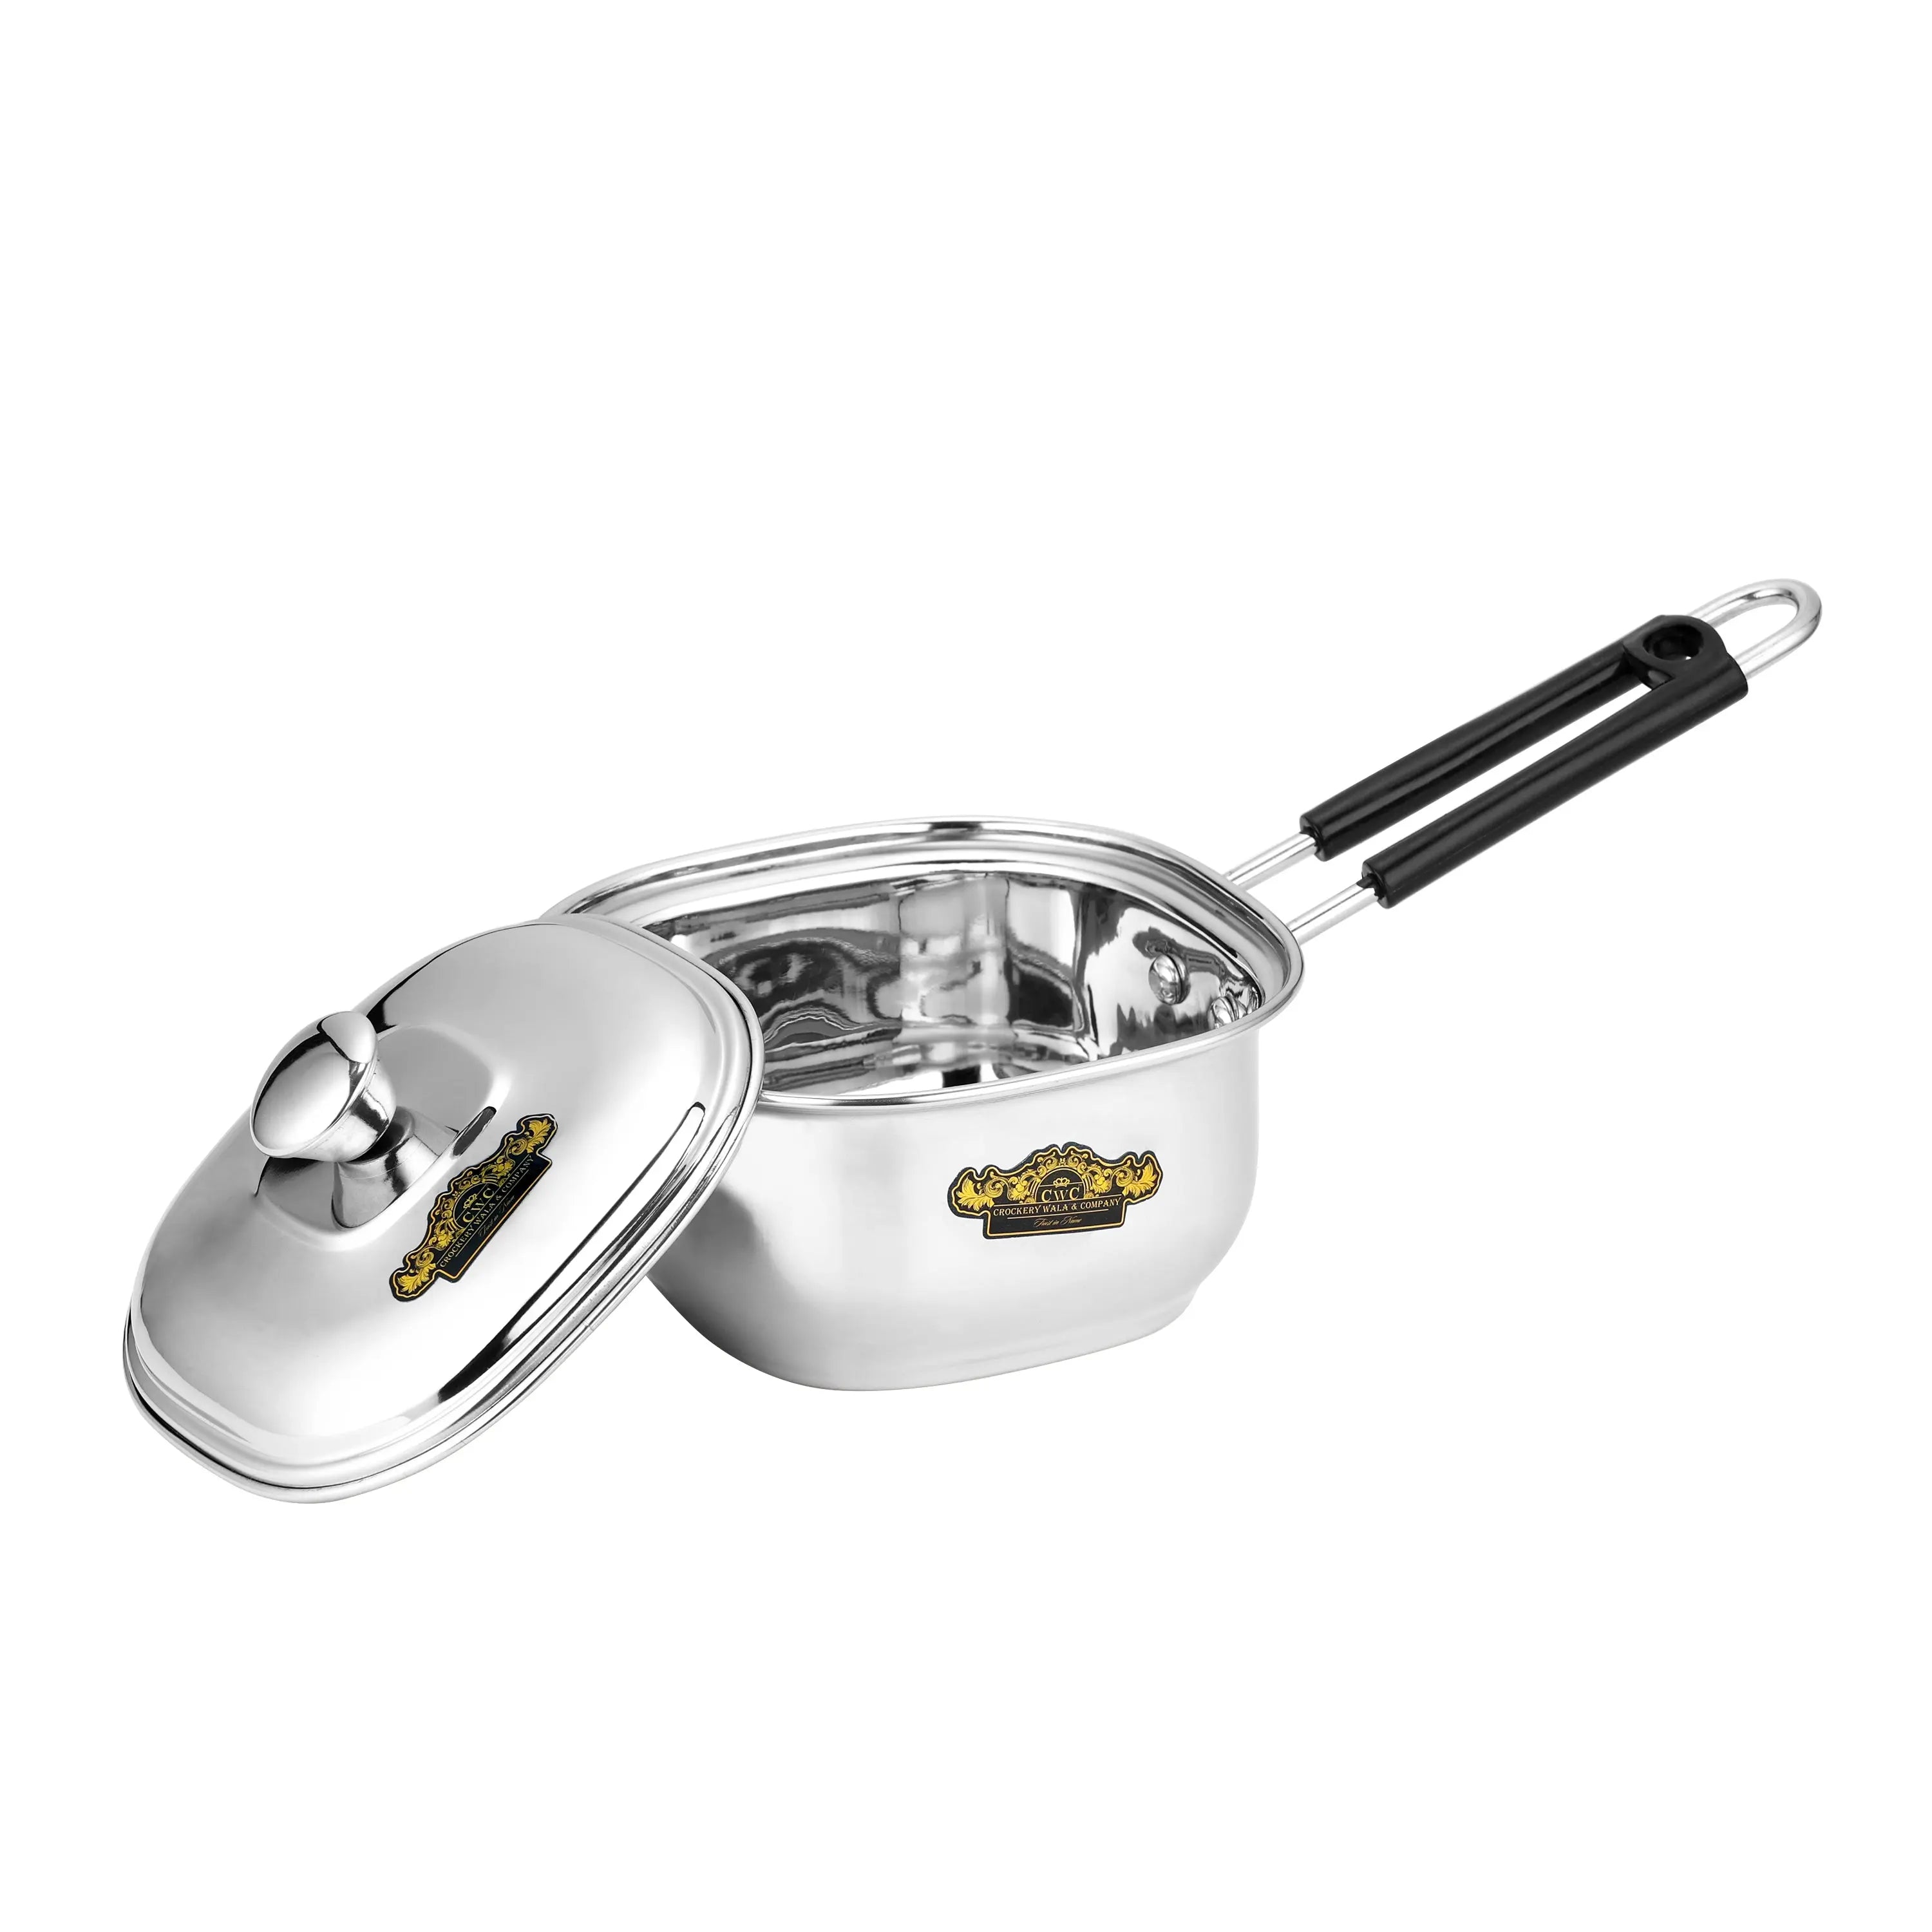 STAINLESS STEEL SQUARE BELLY SAUCE PAN WITH LID - CROCKERY WALA AND COMPANY 